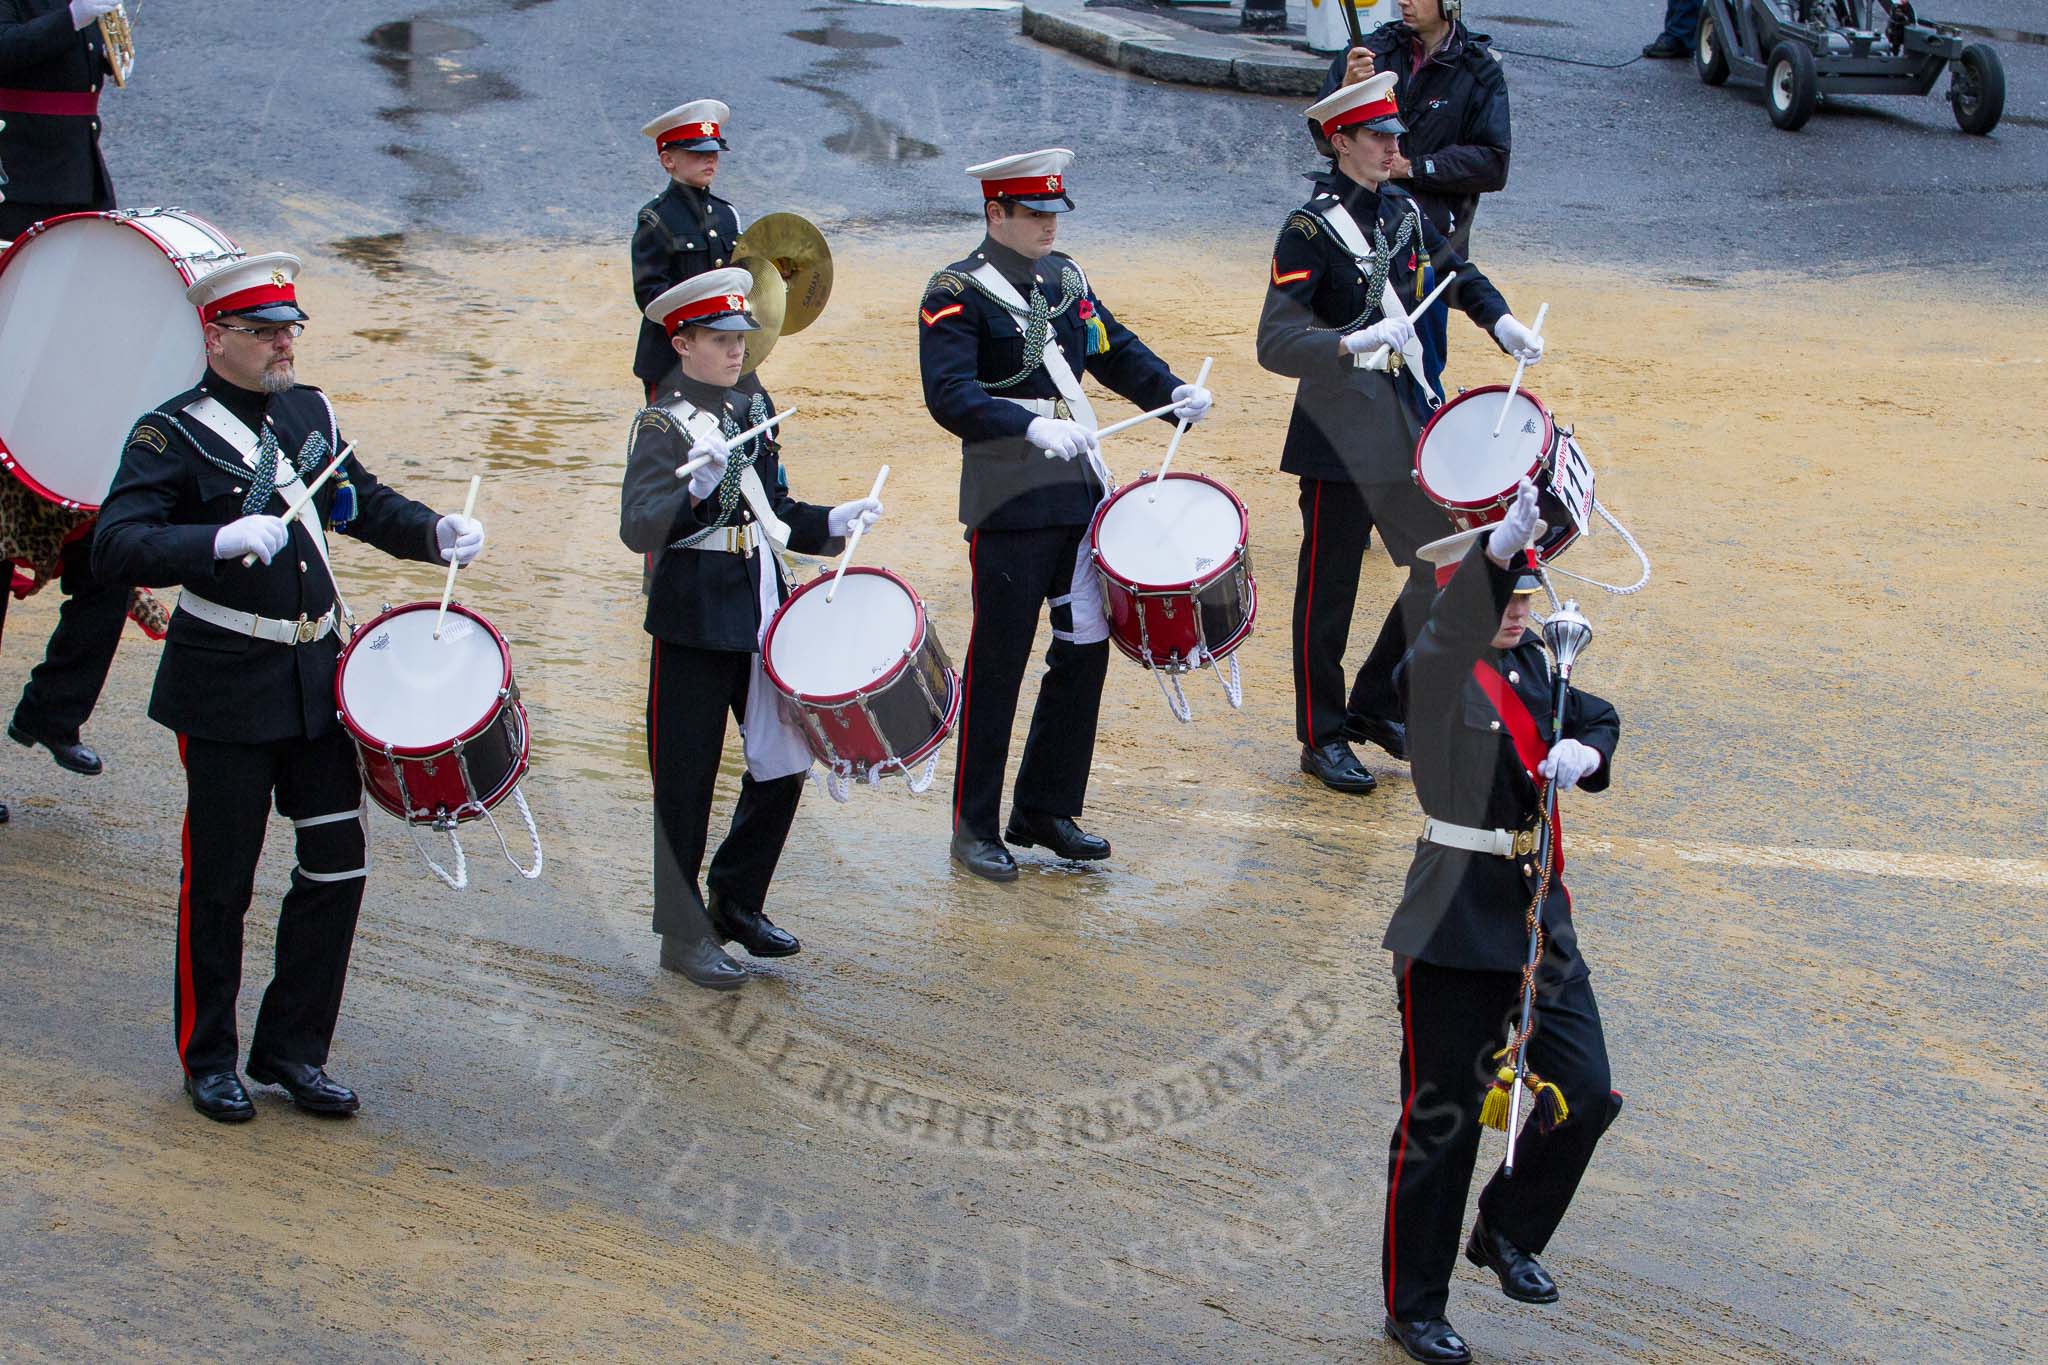 Lord Mayor's Show 2012: Entry 111 - Surbiton Royal British Legion Band..
Press stand opposite Mansion House, City of London,
London,
Greater London,
United Kingdom,
on 10 November 2012 at 11:56, image #1595